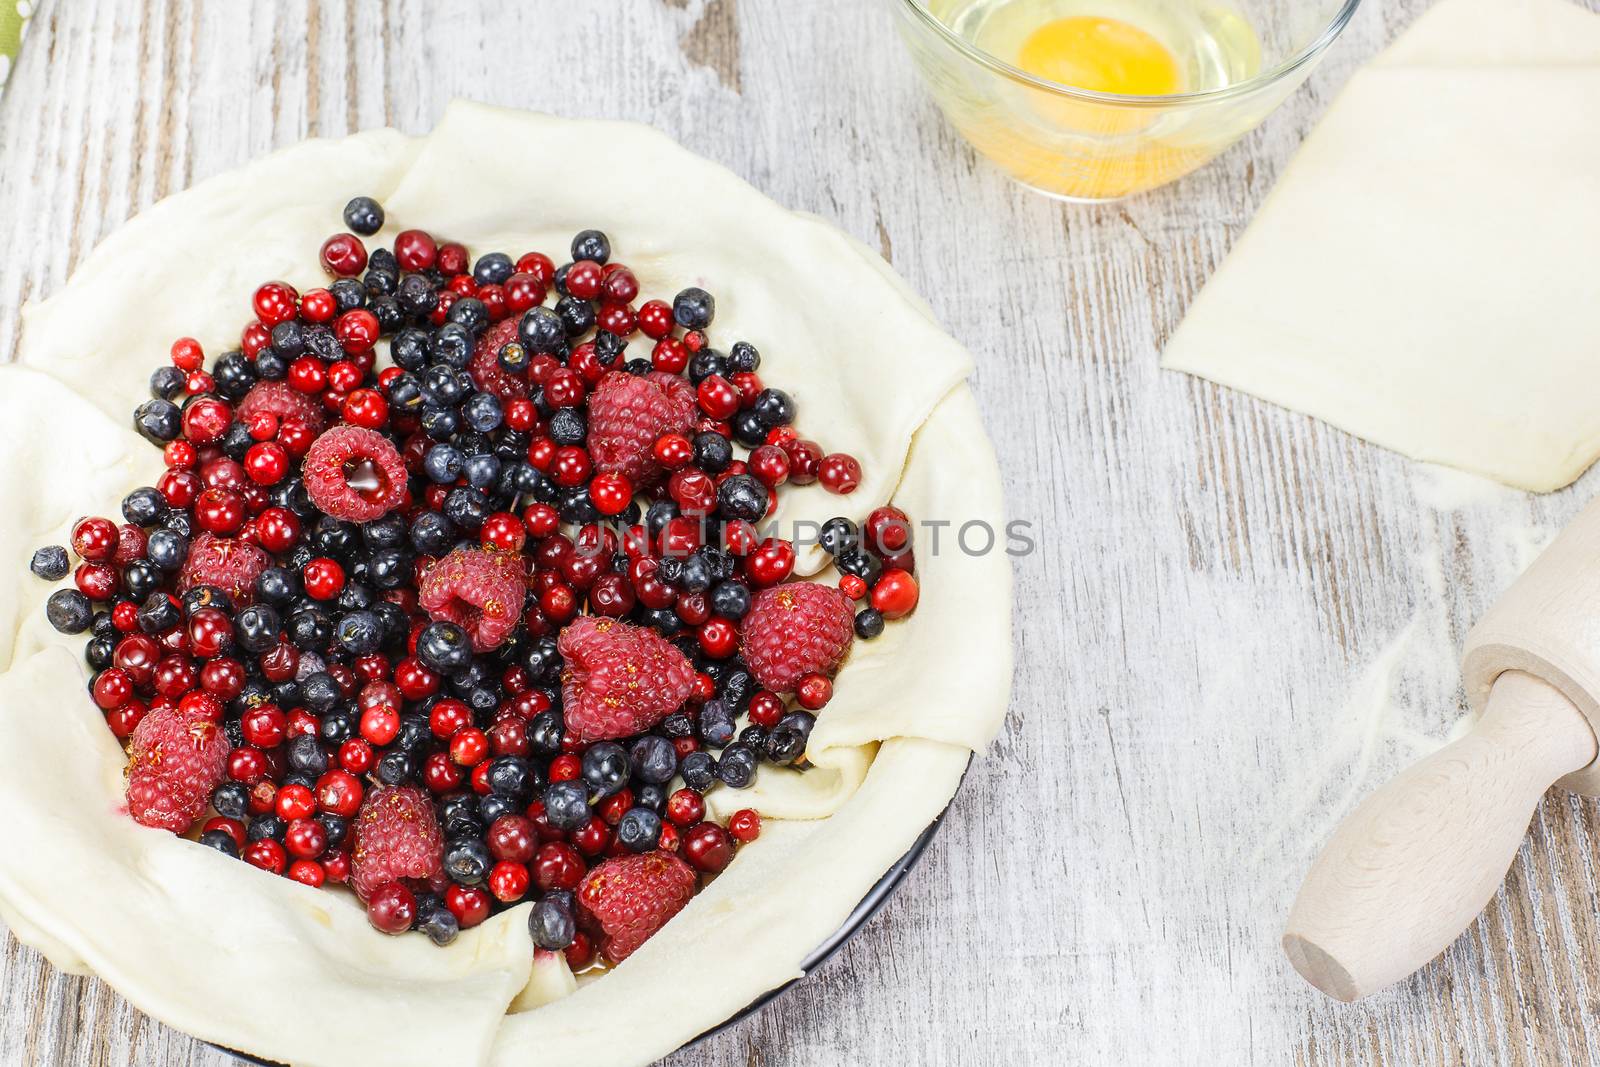 Preparation for baking berry pie